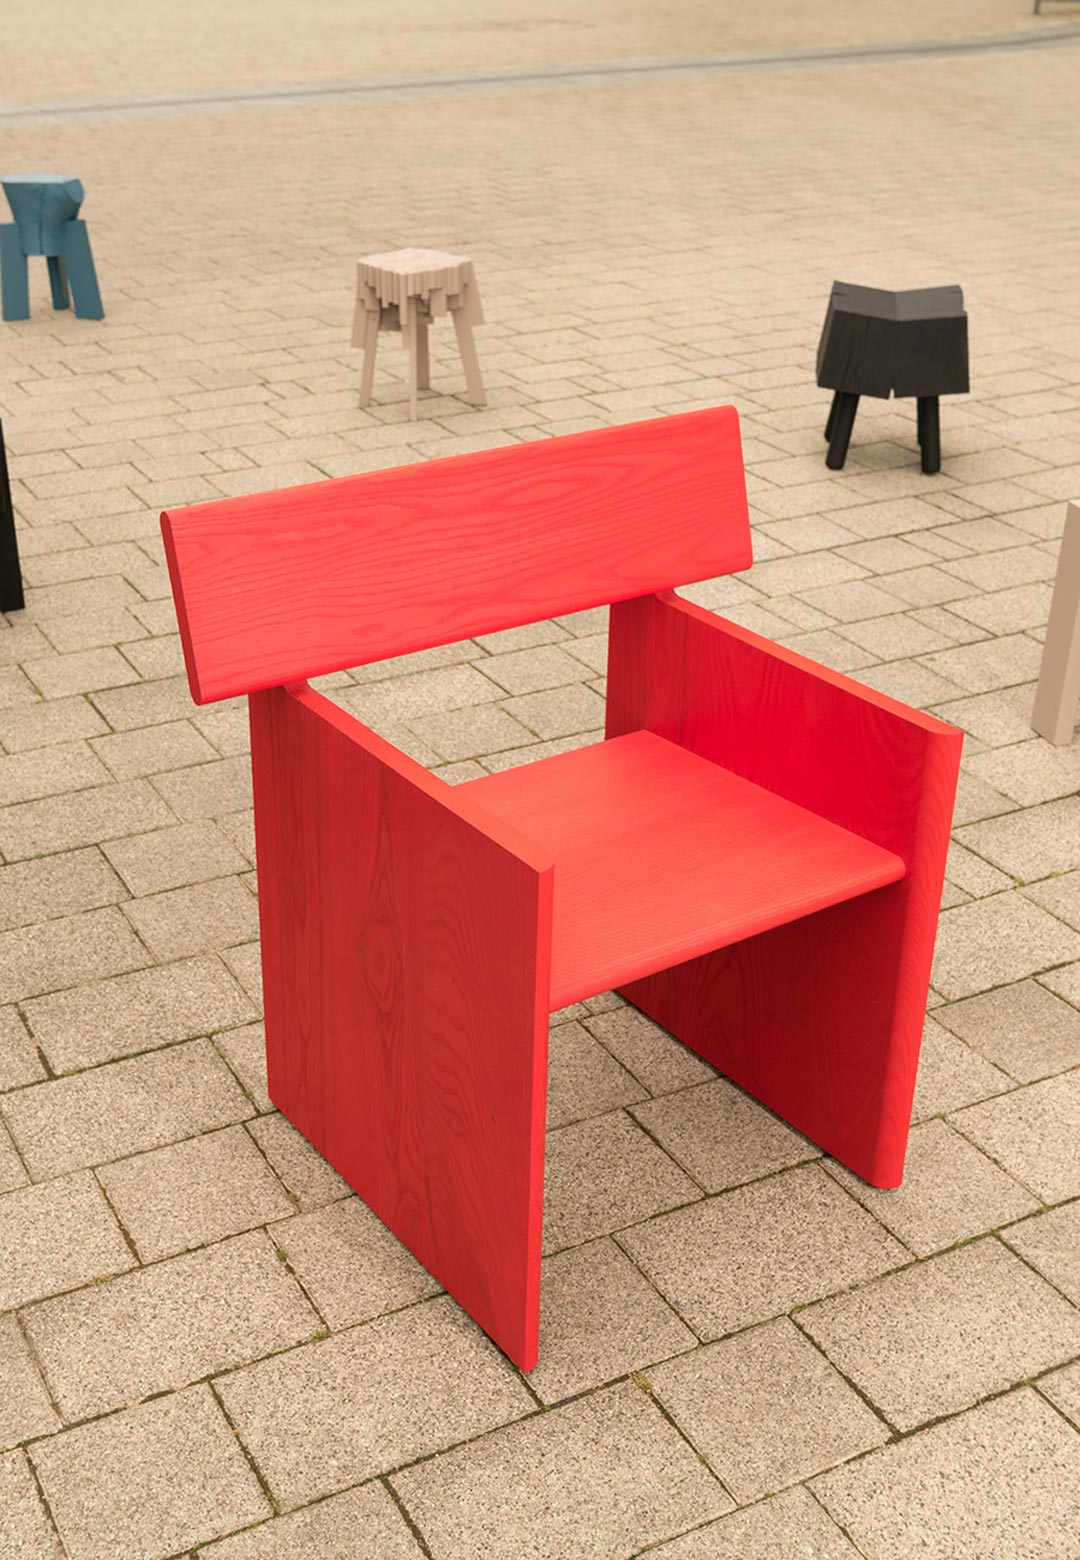 (Re)imagining Aydon: an exposition of modern furniture objects at Aydon Castle